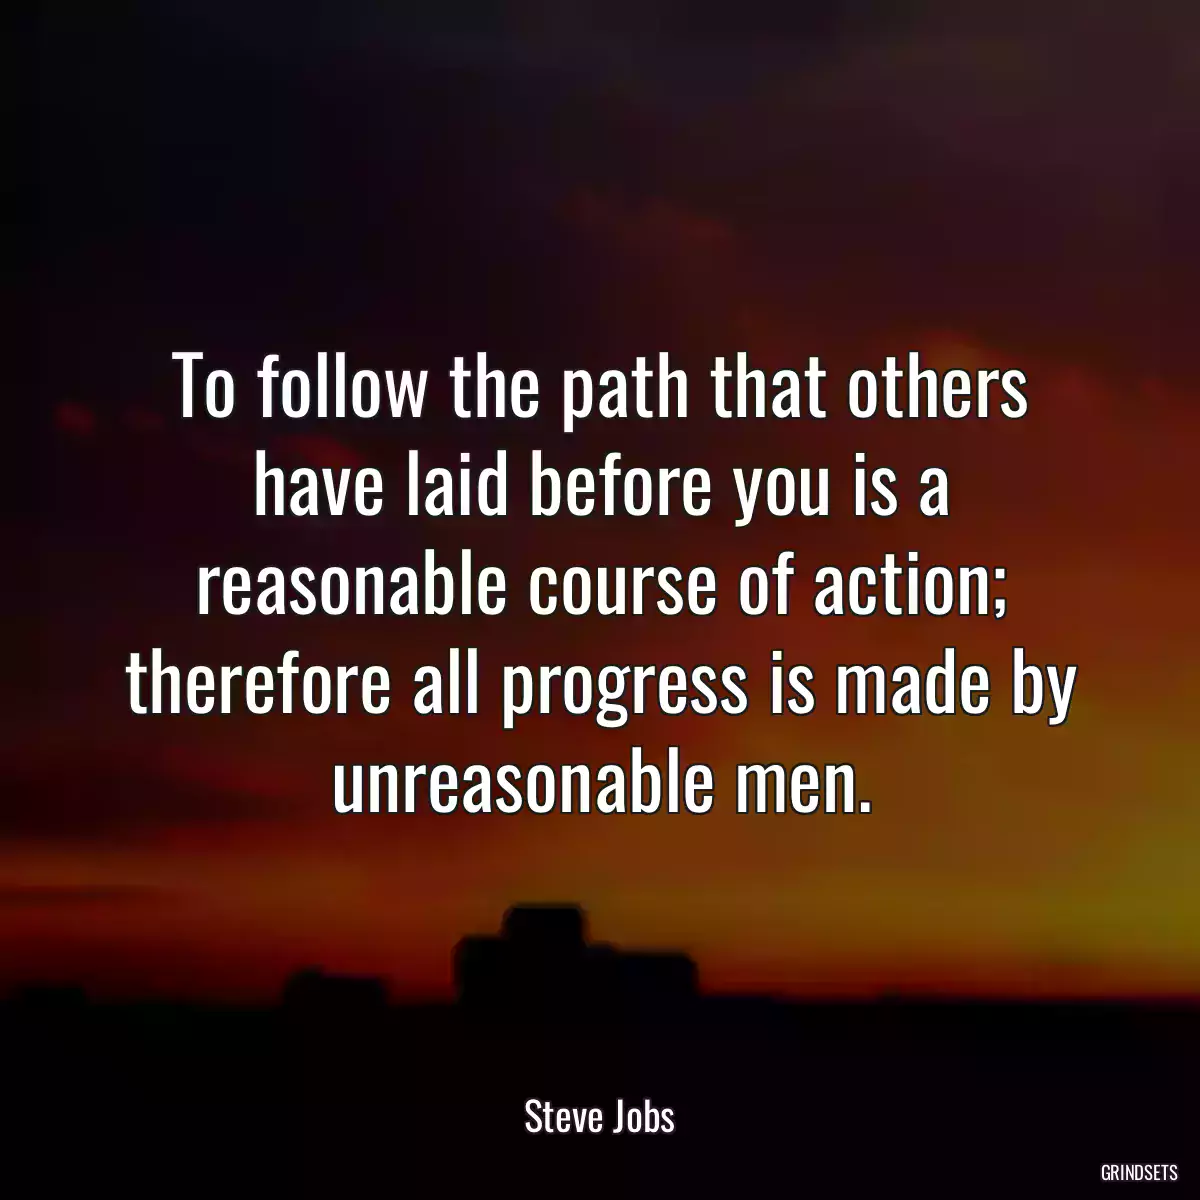 To follow the path that others have laid before you is a reasonable course of action; therefore all progress is made by unreasonable men.